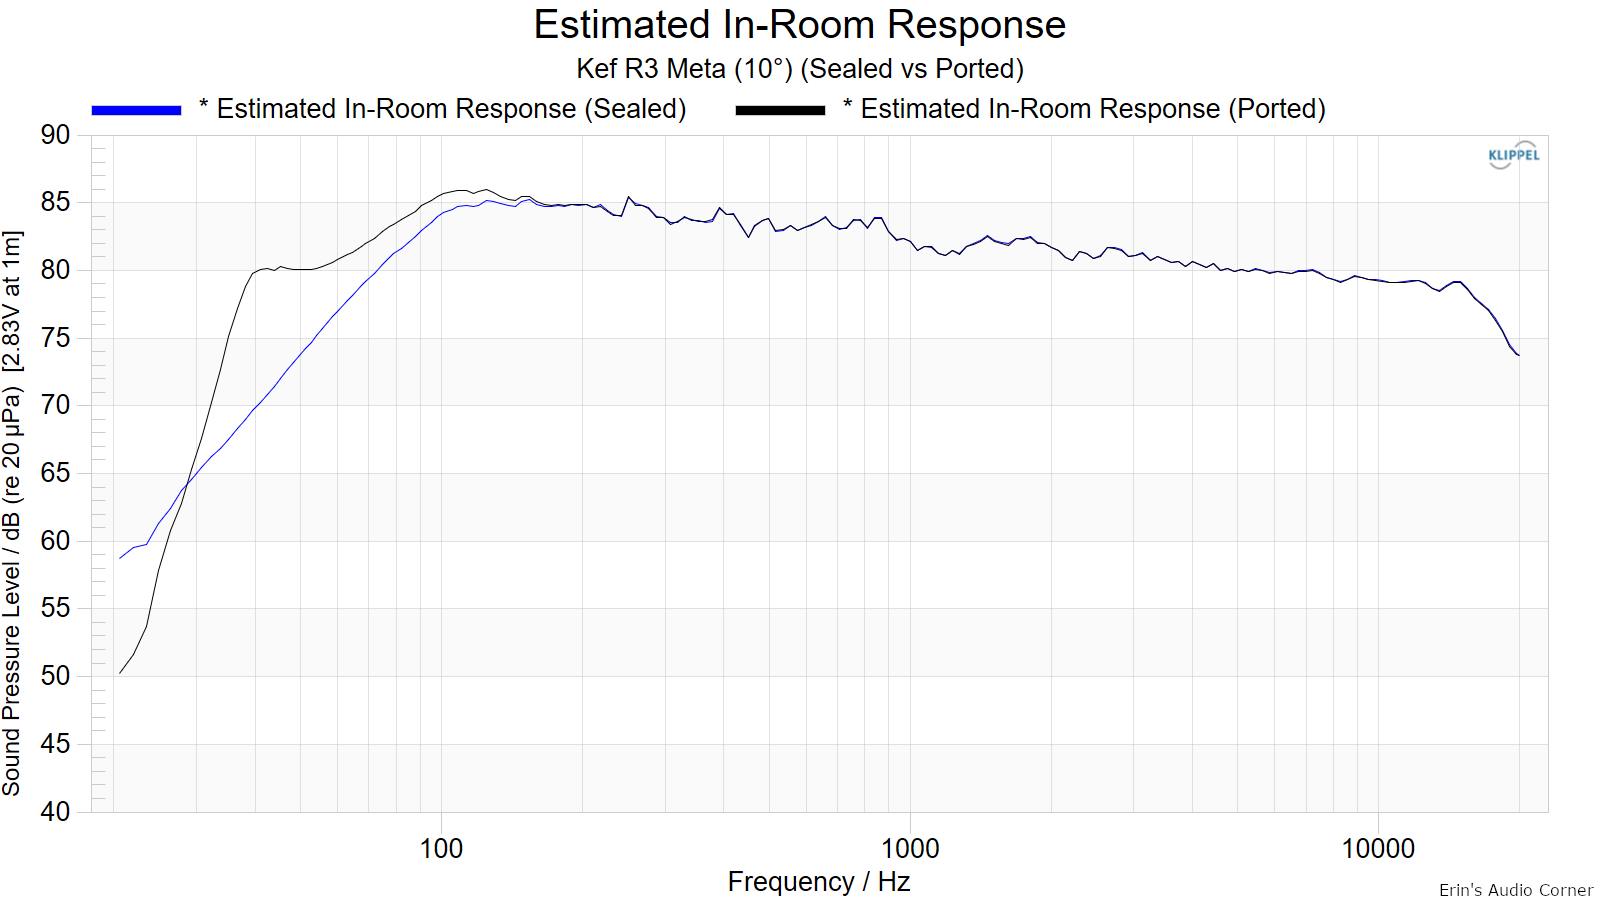 Estimated In-Room Response Sealed vs Ported.png